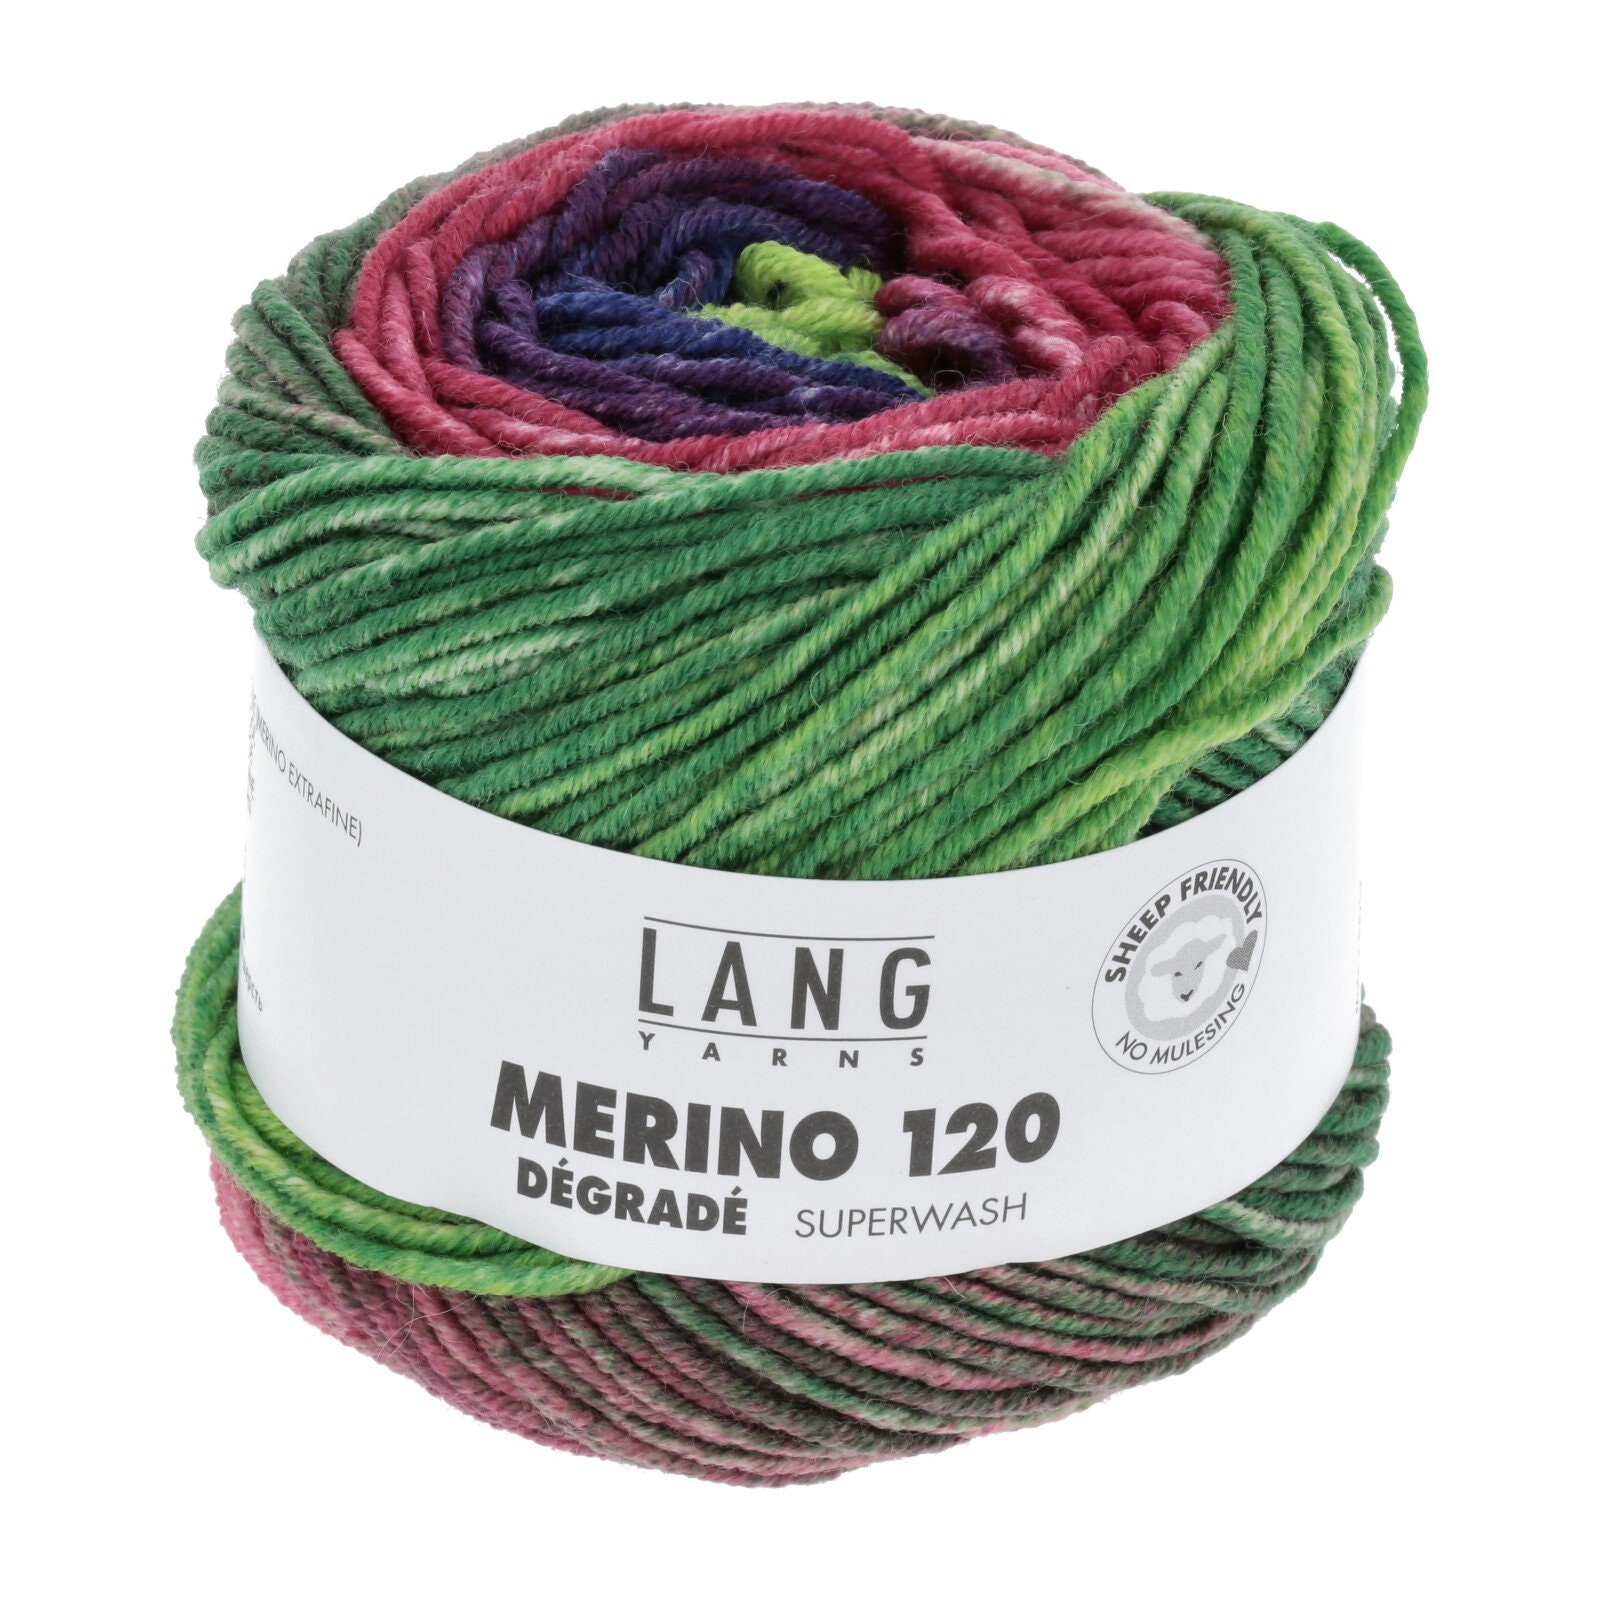 Buy 150/1kg MERINO DÉGRADÉ by Yarns All Colors Online in India - Etsy